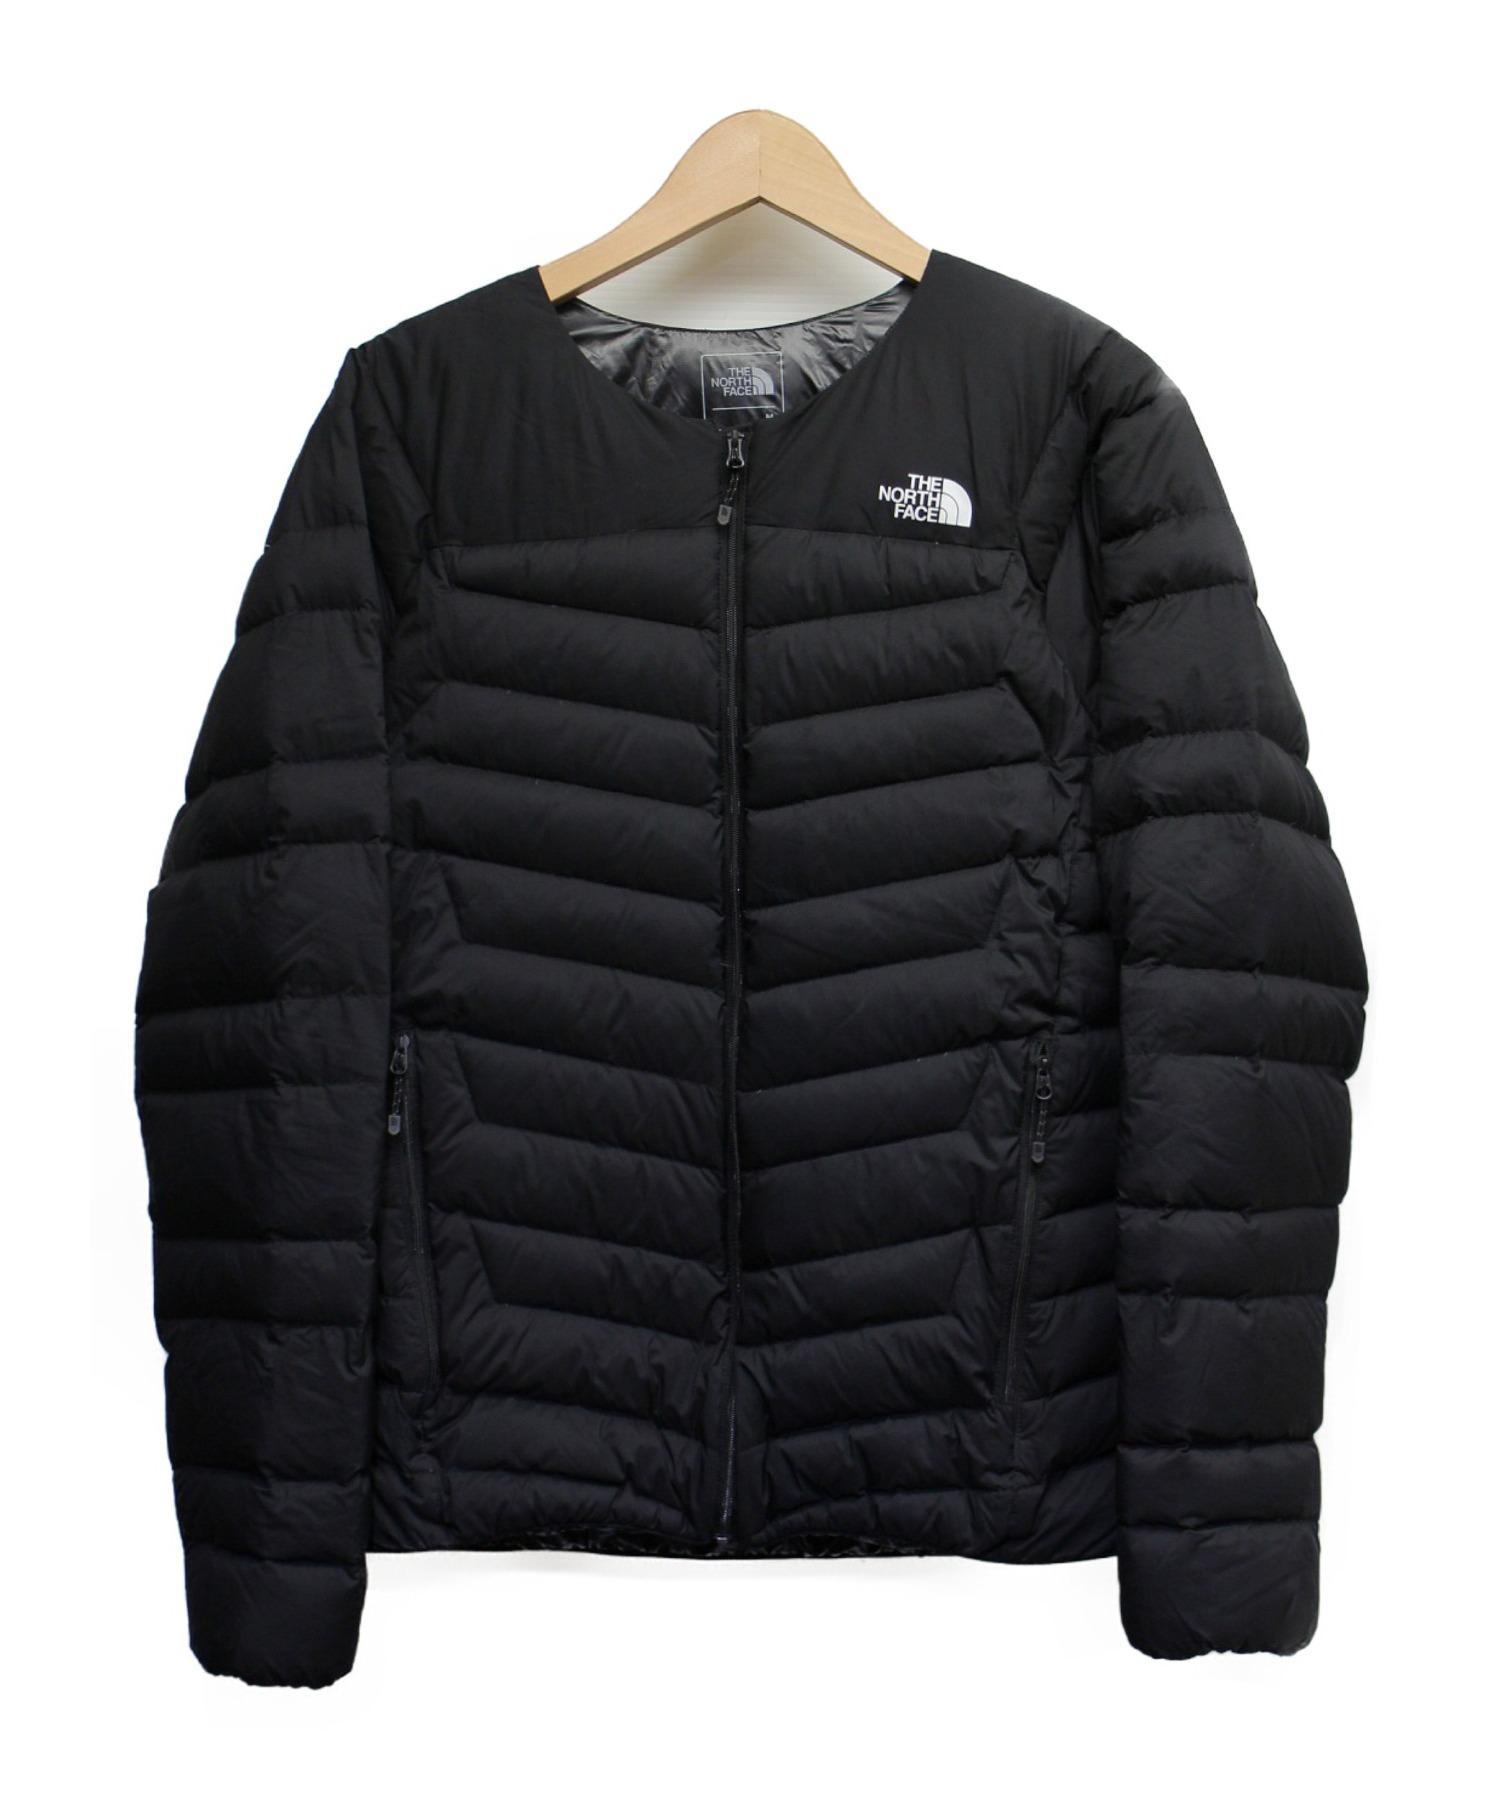 THE NORTH FACE - THE NORTH FACE サンダーラウンドネックジャケットの